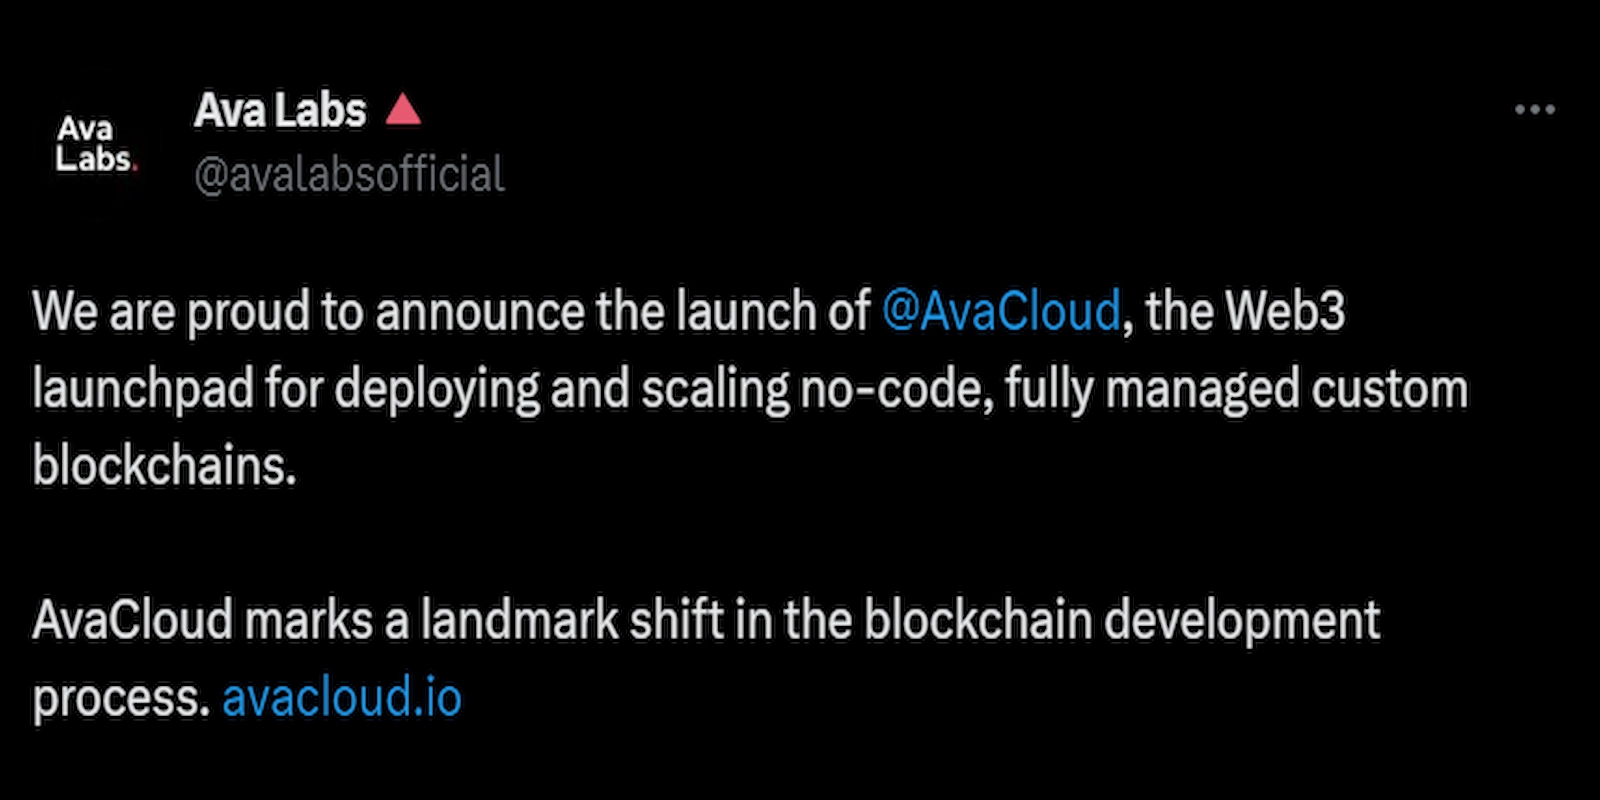 Avalanche announced the launch of its Web 3 launchpad AvaCloud